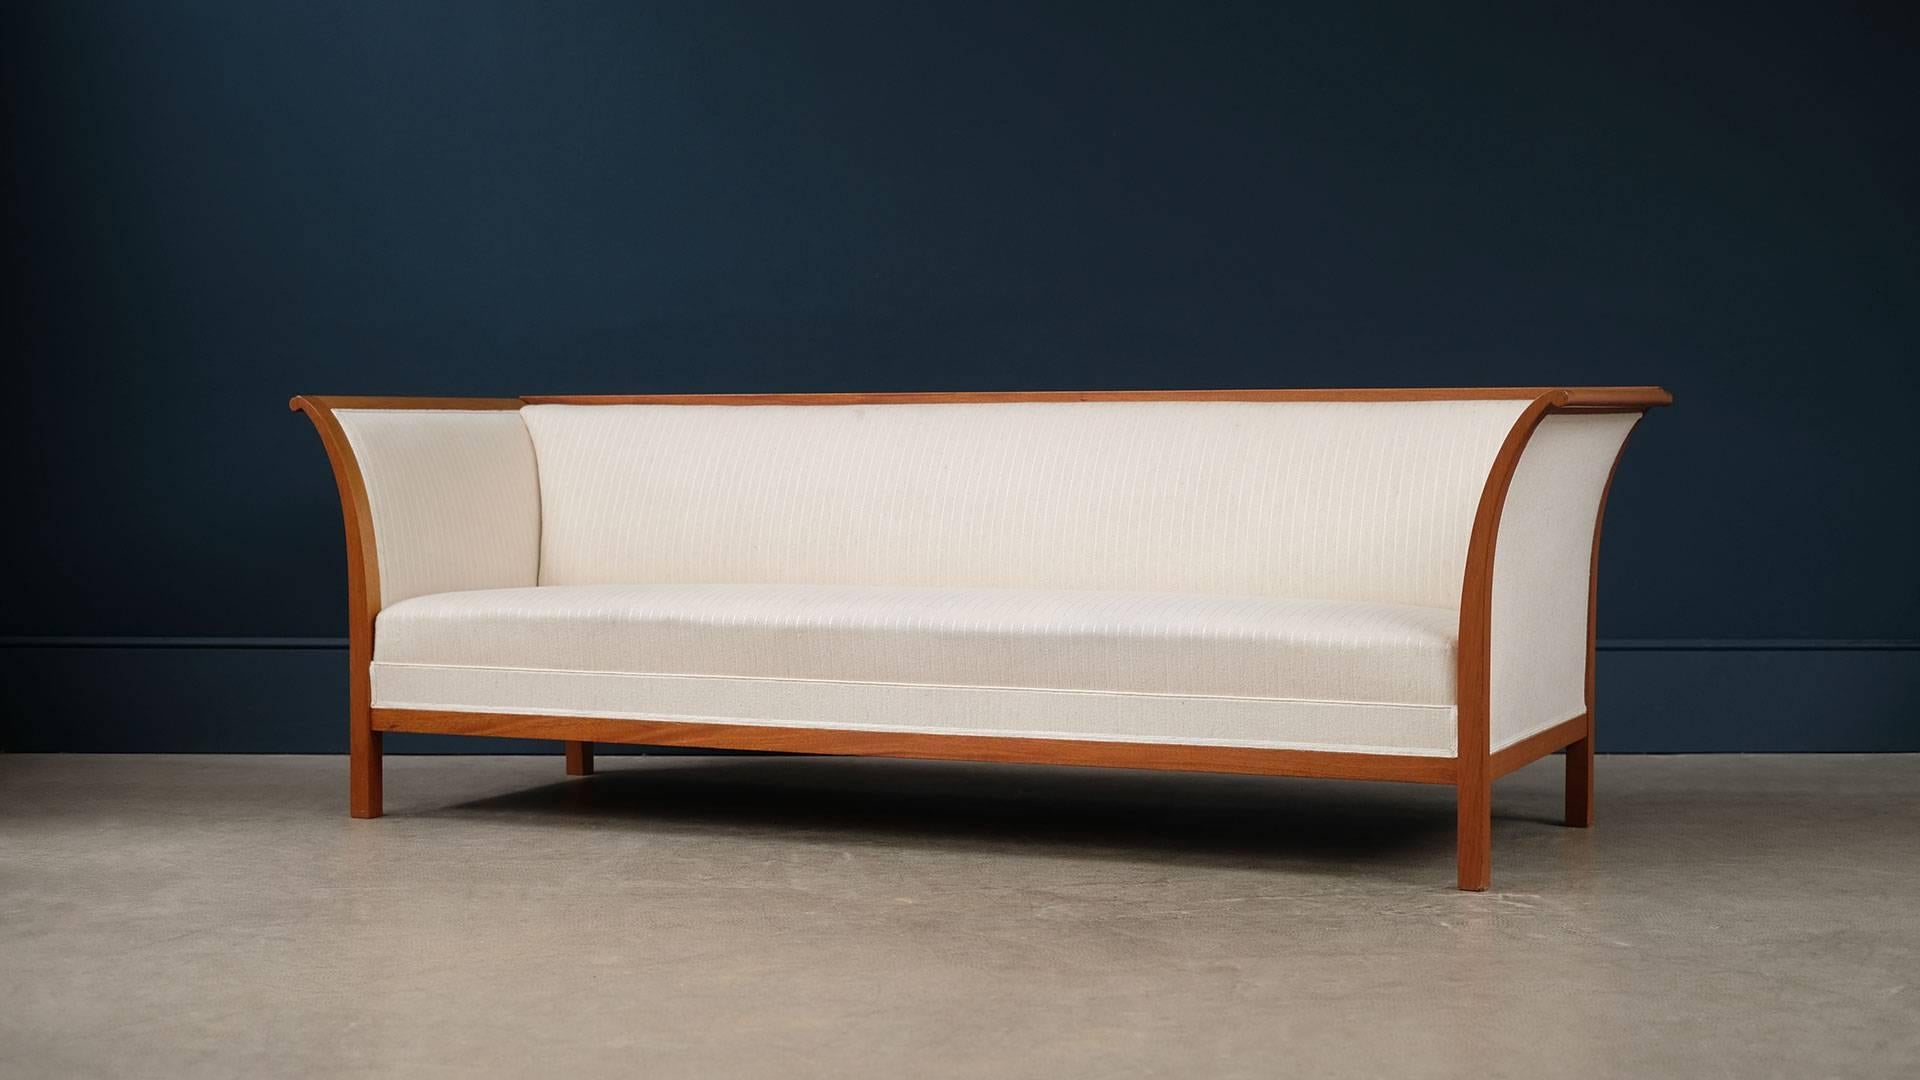 Super elegant and beautiful three seat sofa designed by Fritz Henningsen for cabinet maker Rud Rasmussen, Denmark. Rare example of this ultra-high quality sofa in sculptural solid mahogany with reindeer hair and silk upholstery.
  